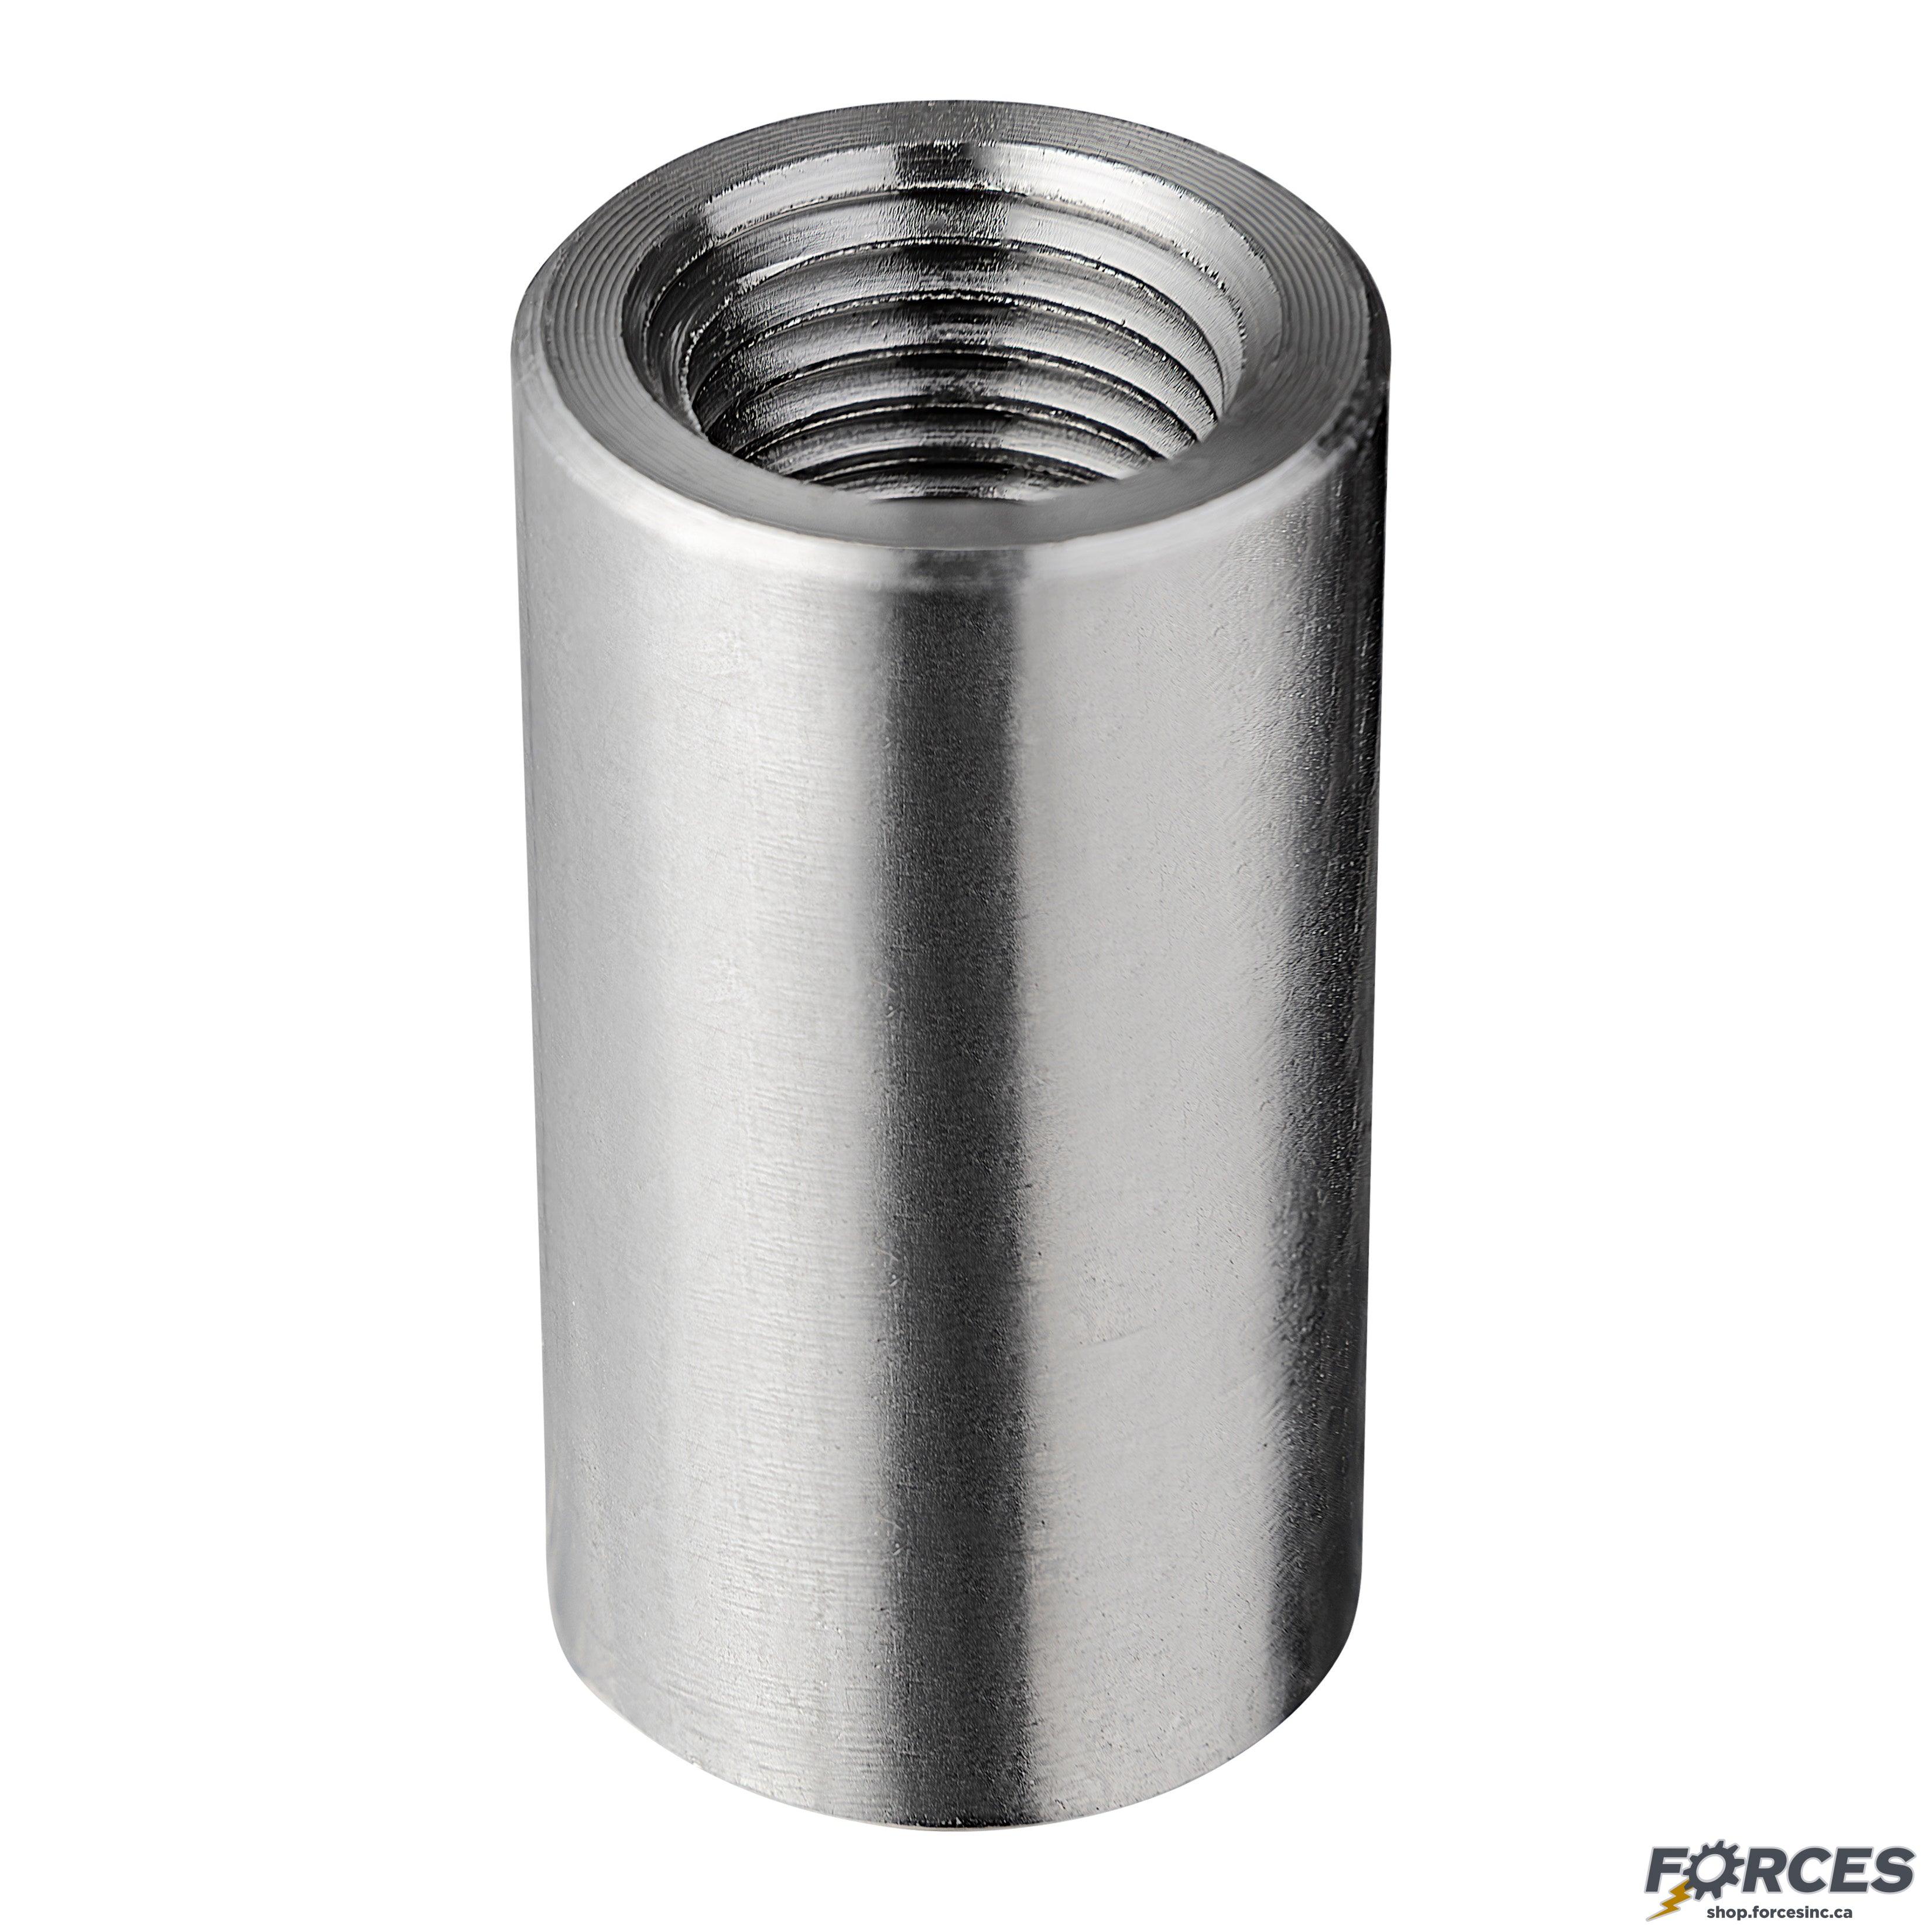 3/4" Full Coupling NPT #3000 - Stainless Steel 316 - Forces Inc